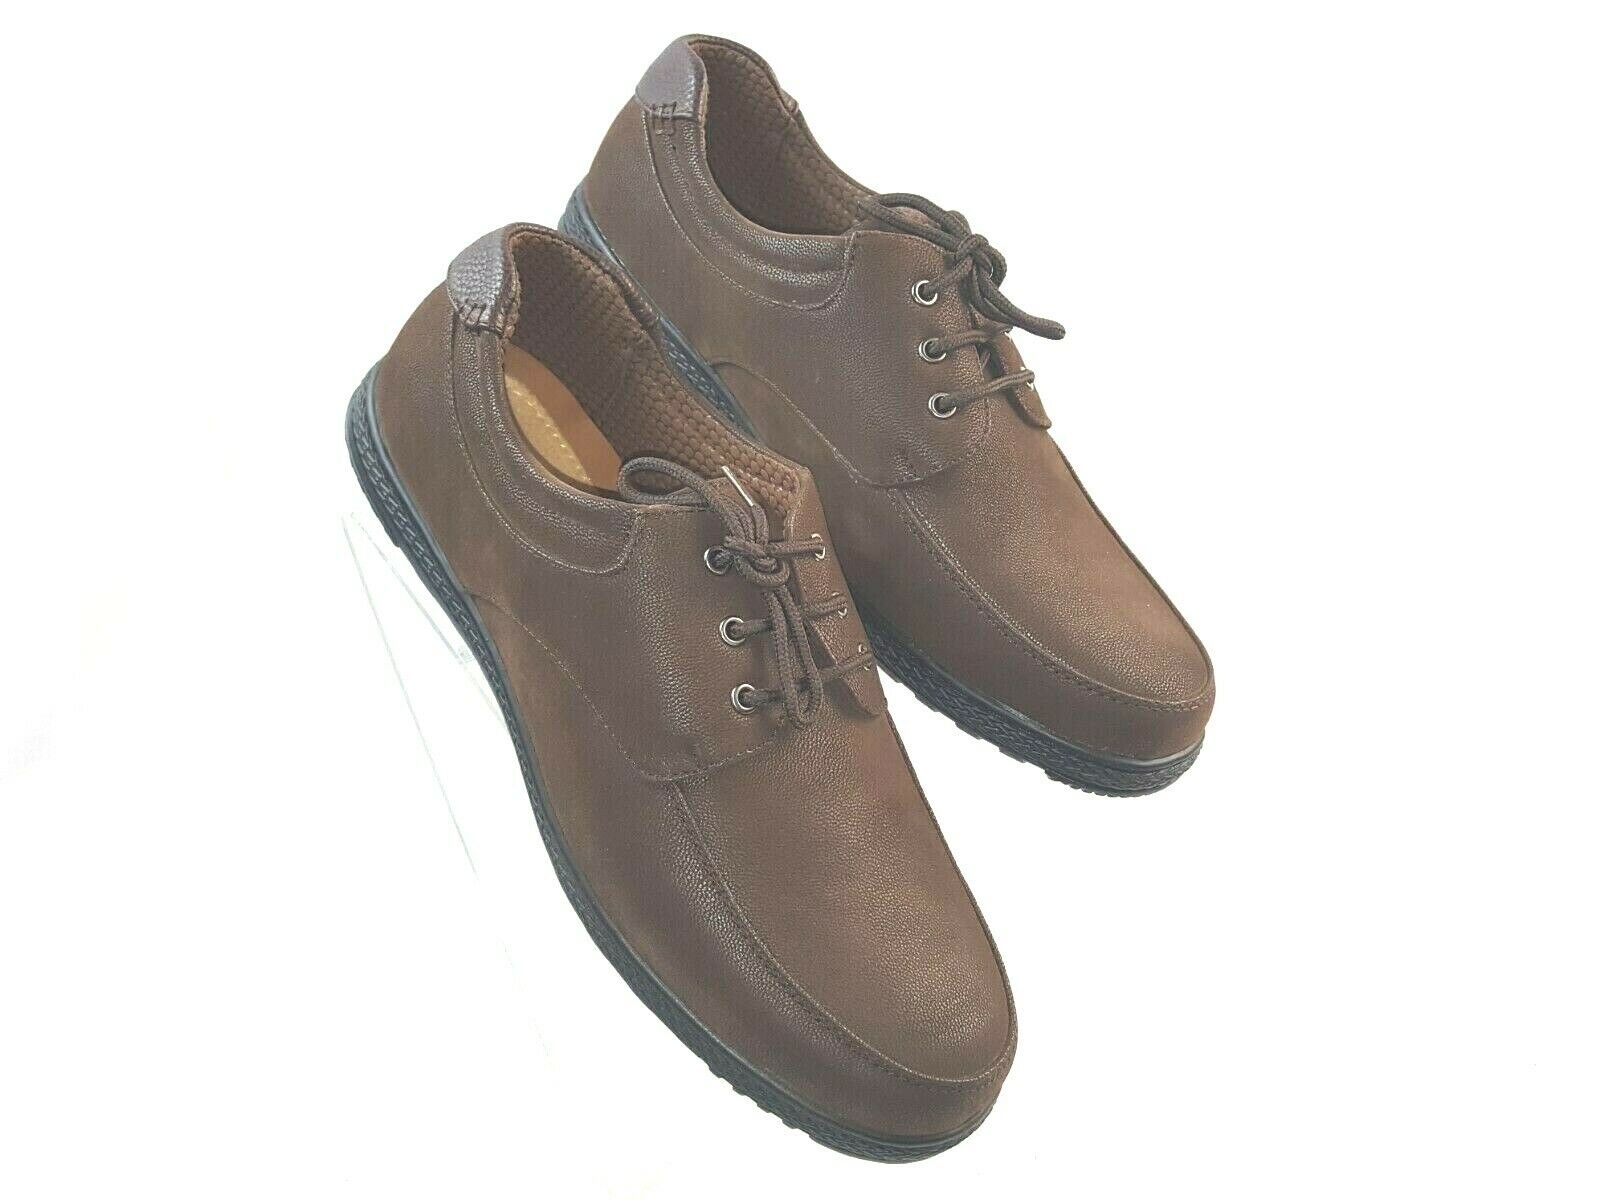 Vikings 50507 Men's Shoes Size 10 Brown Lace-Up Casual Shoes